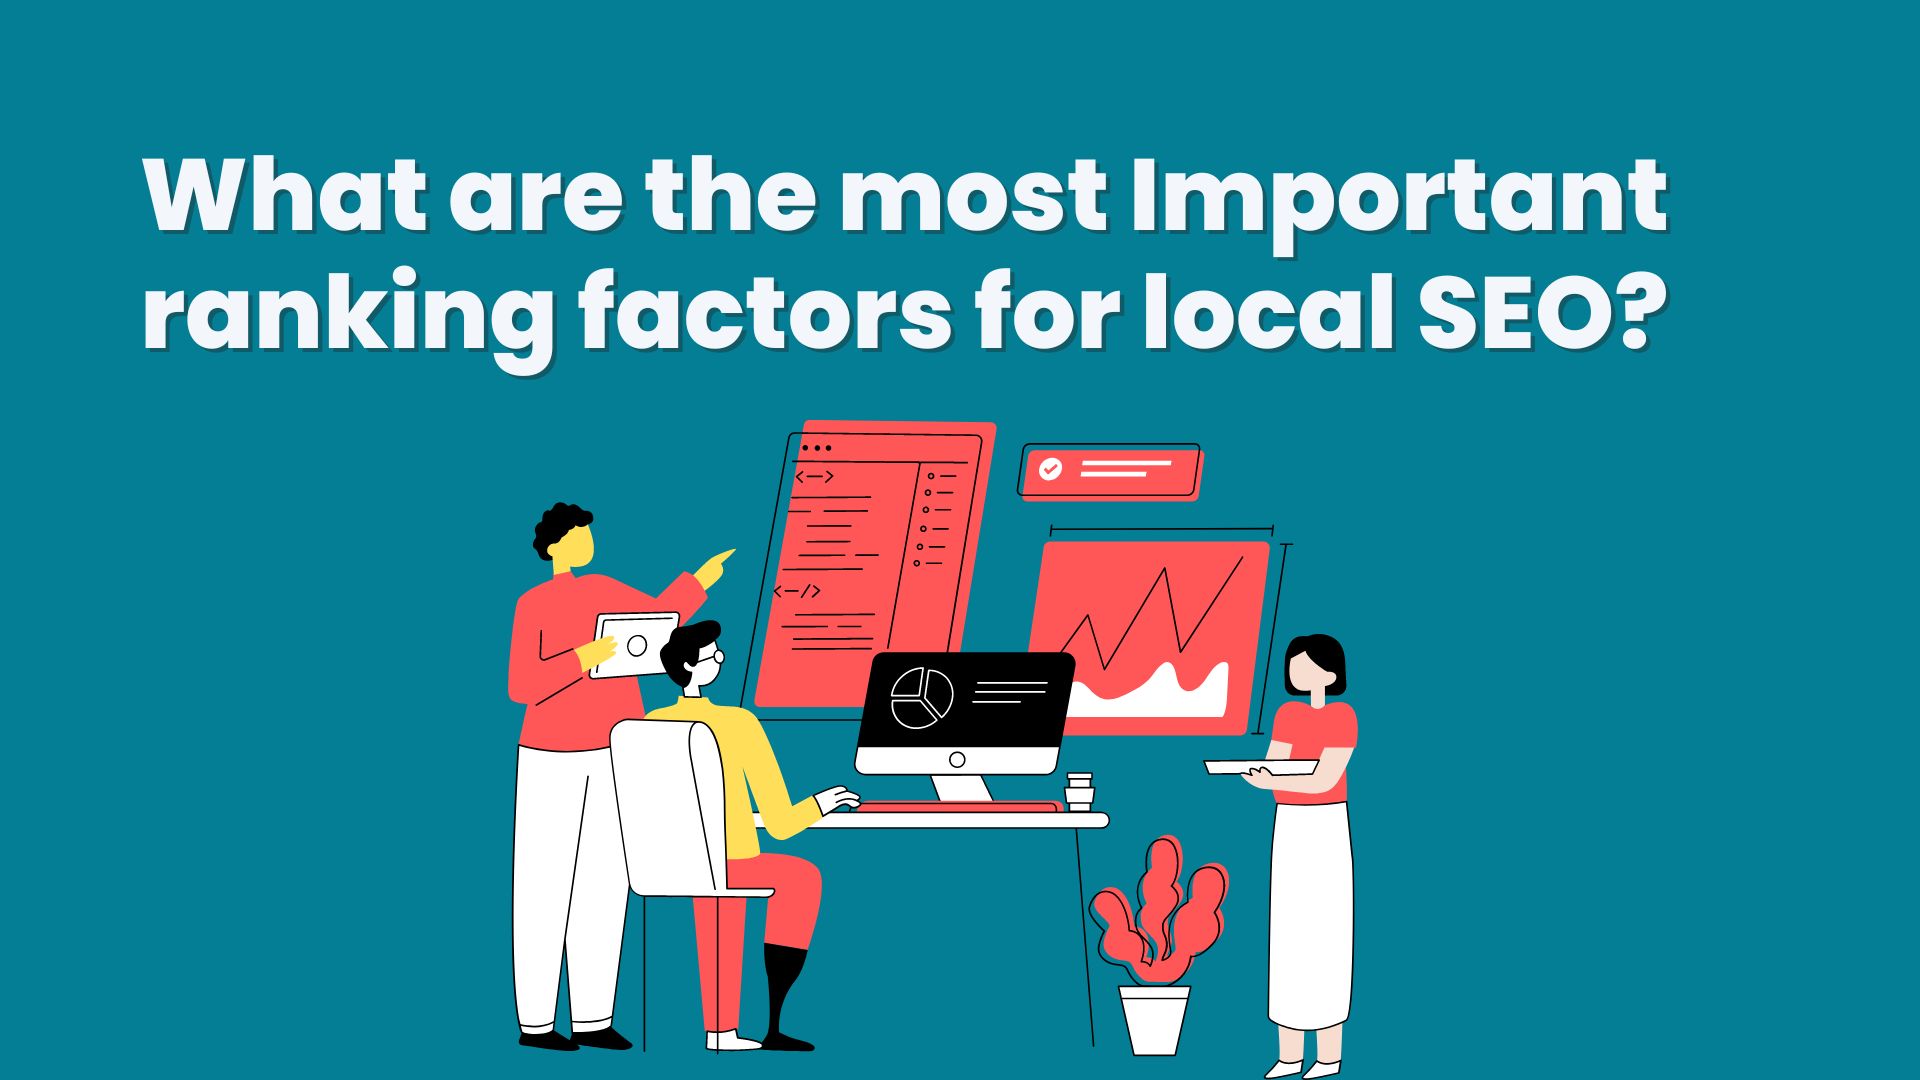 What are the most important ranking factors for local SEO